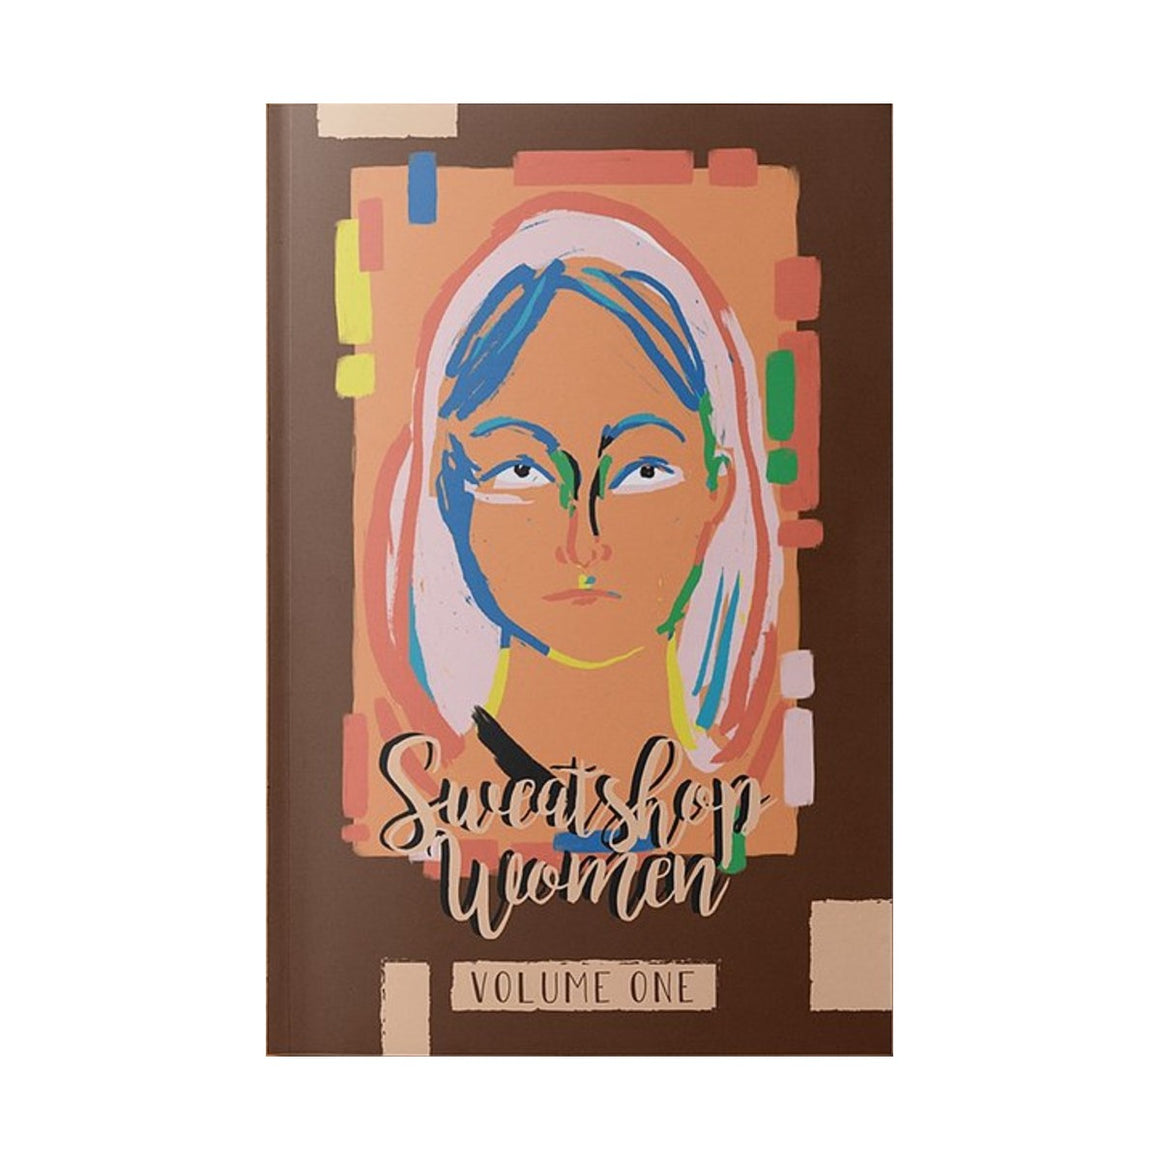 Image of a book cover featuring a painted woman's face.